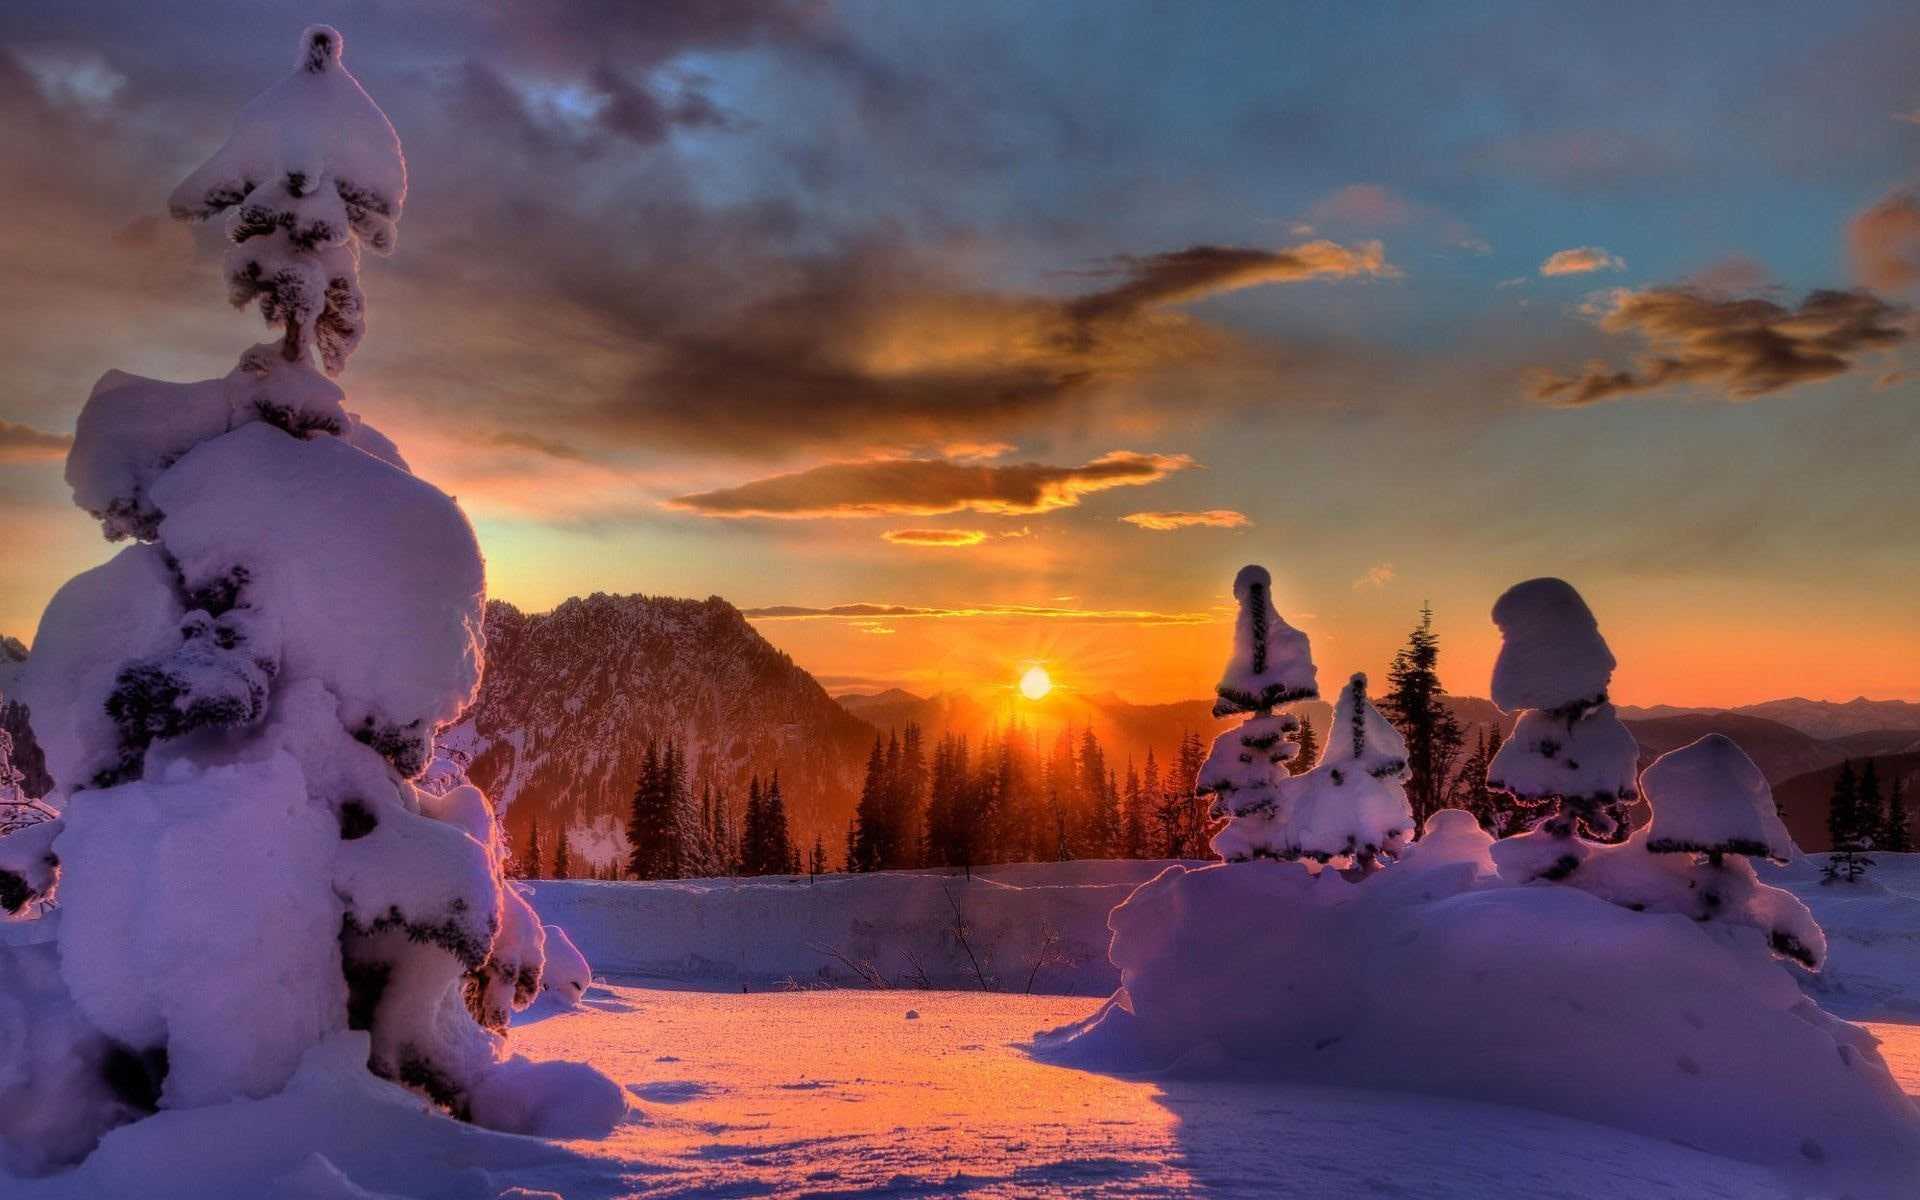 Winter Background Wallpaper Nawpic